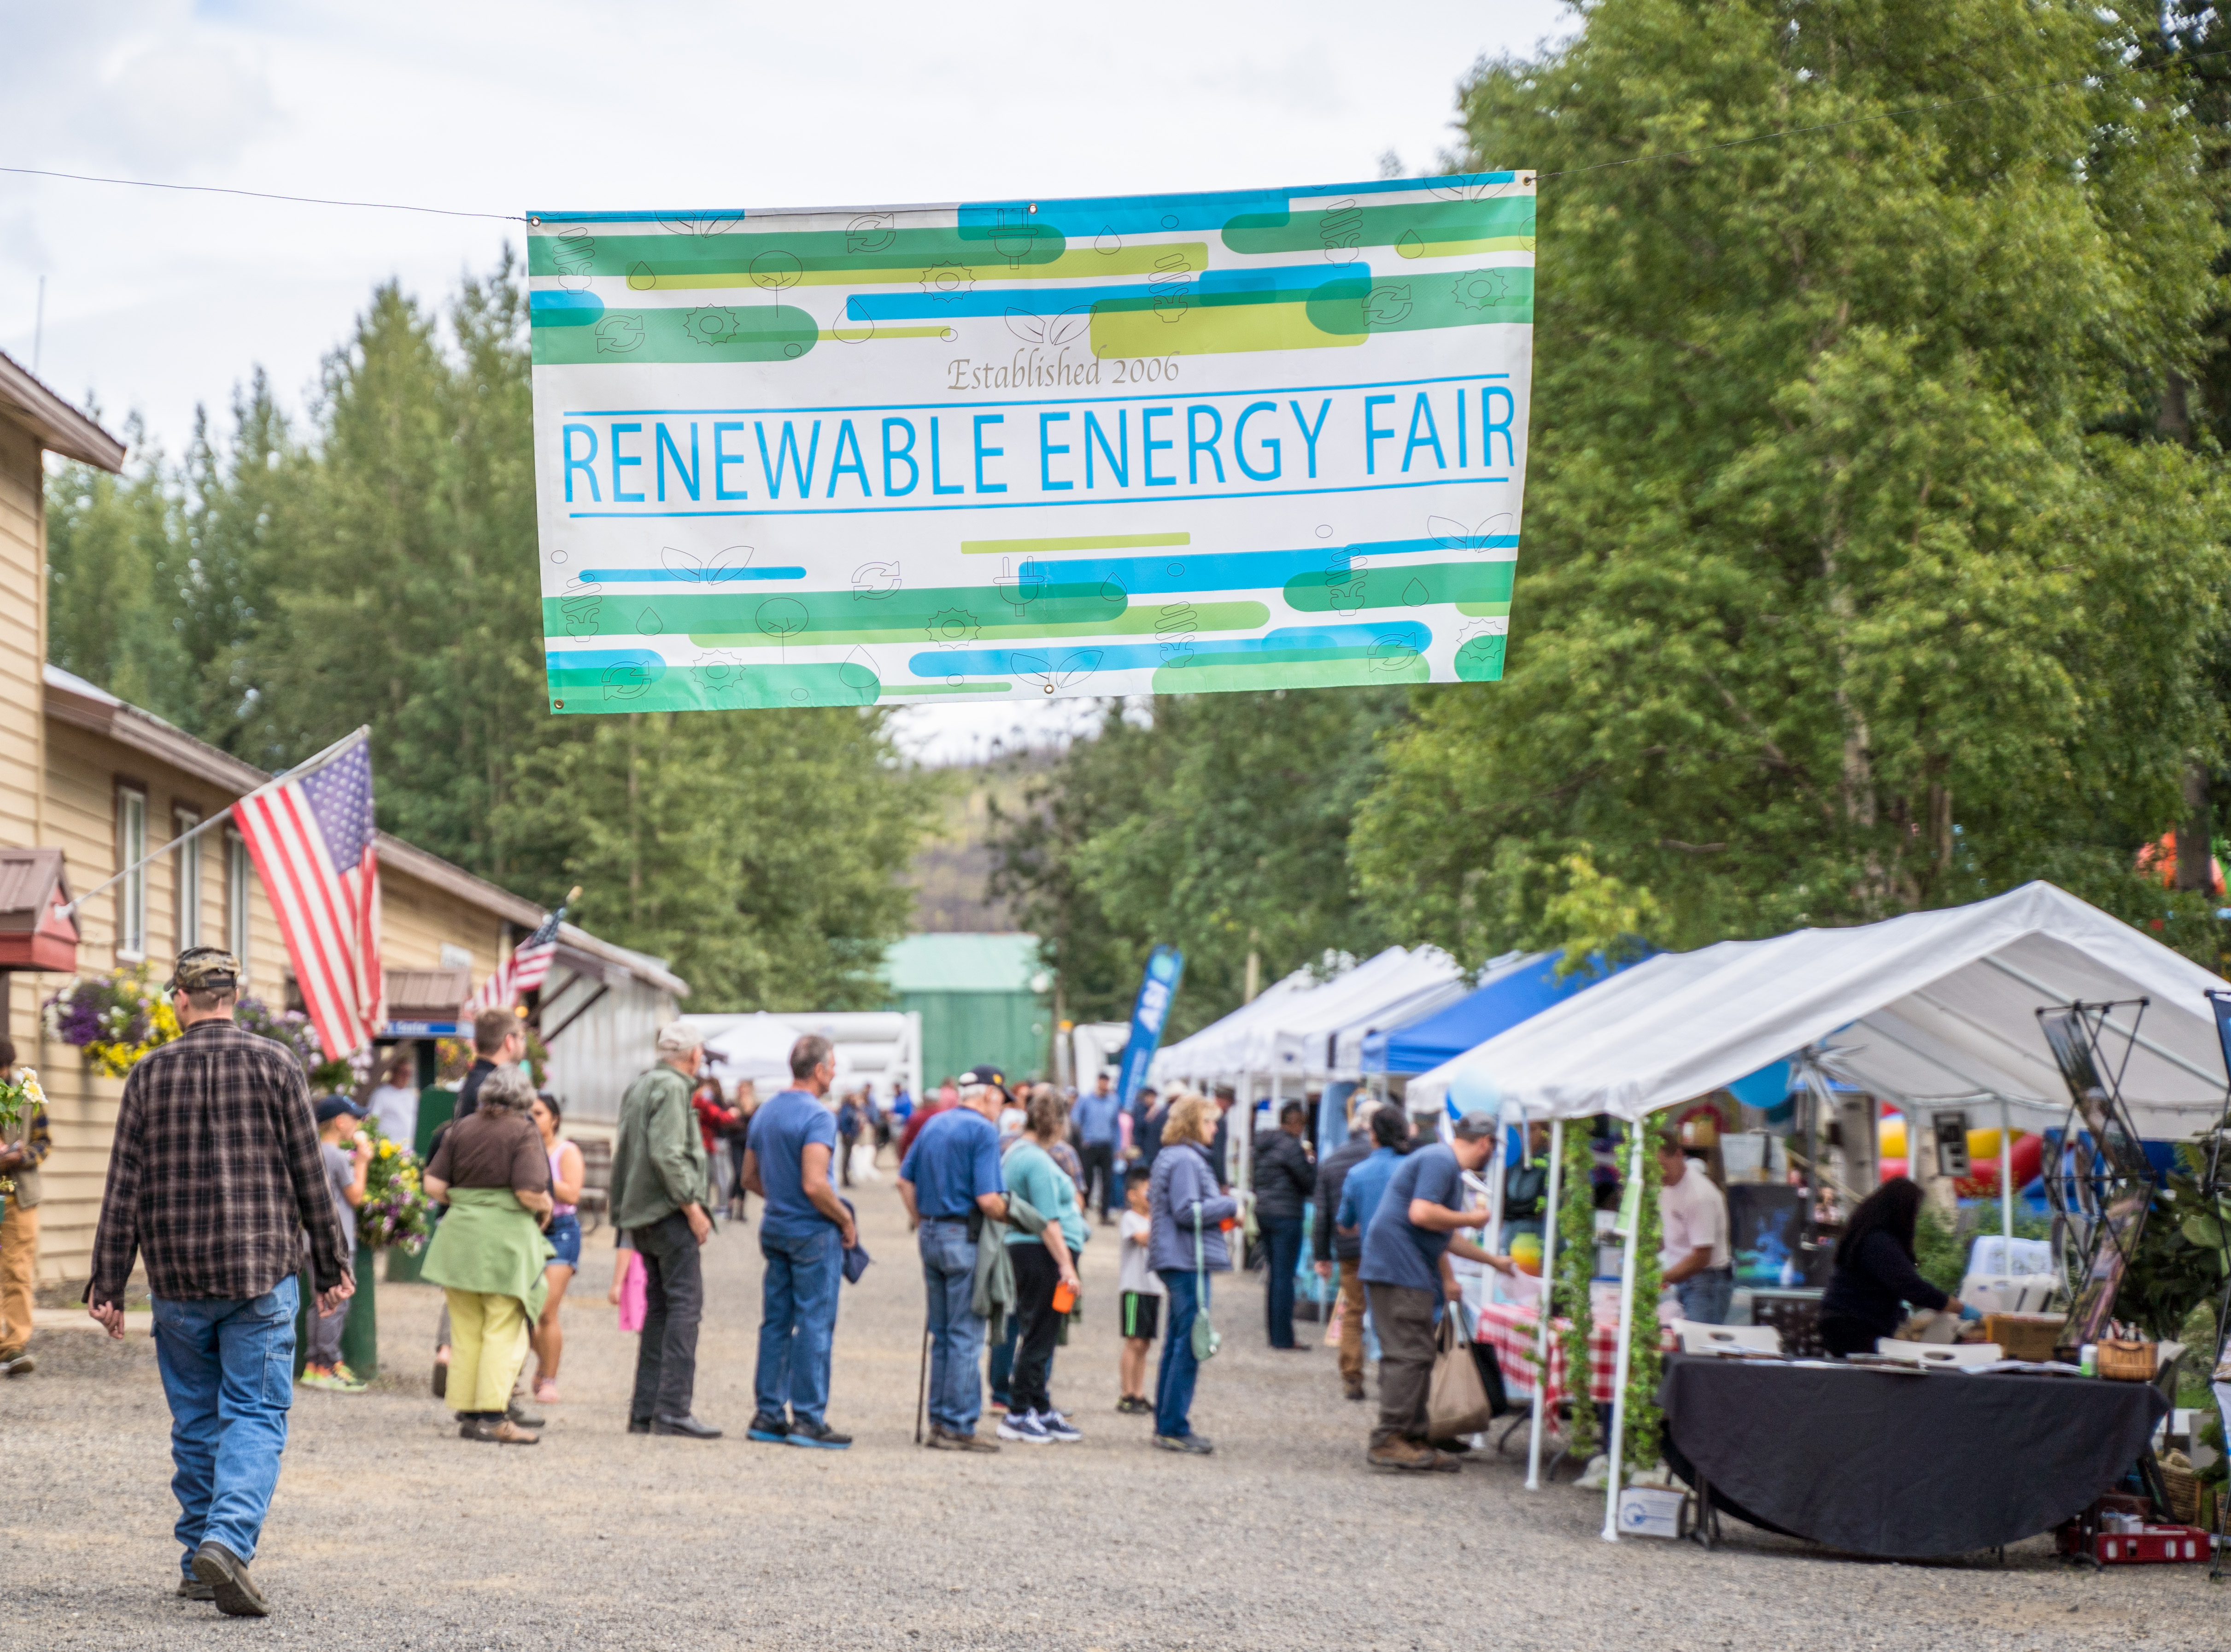 ACEP Shared Research Findings and Information at Renewable Energy Fair